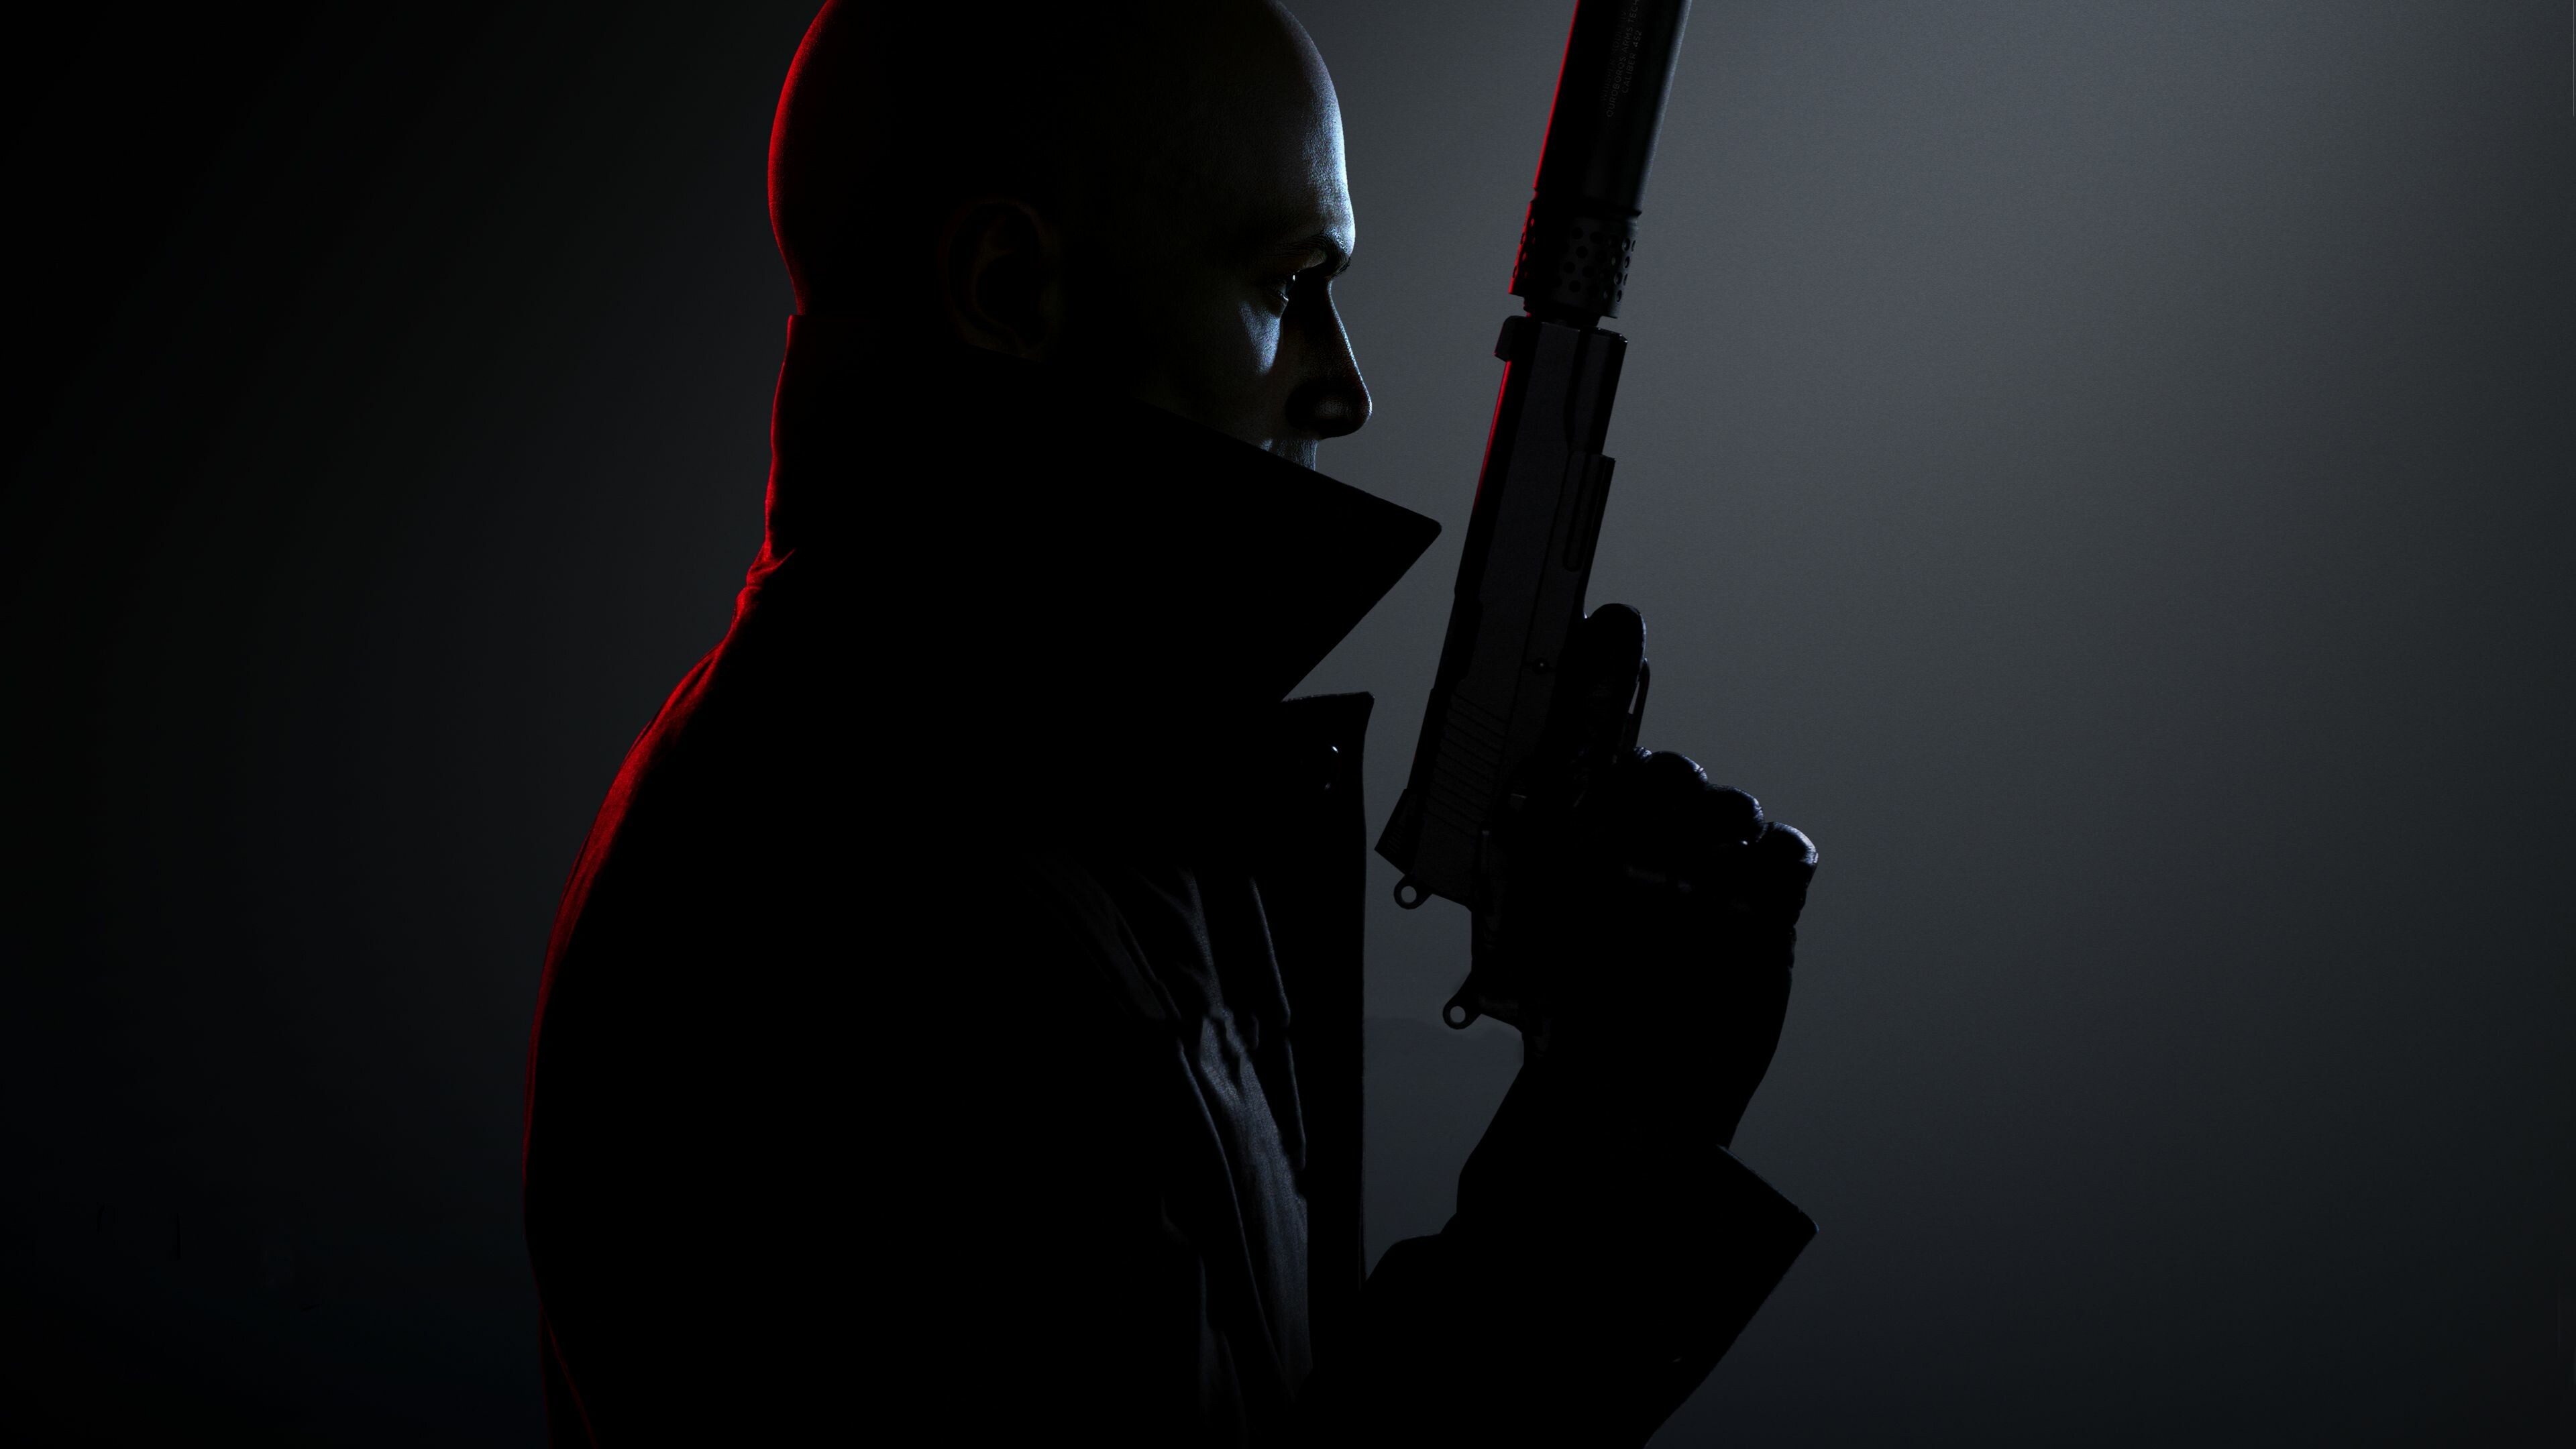 Hitman (Game): Developed and published by IO Interactive, 2021. 3840x2160 4K Wallpaper.